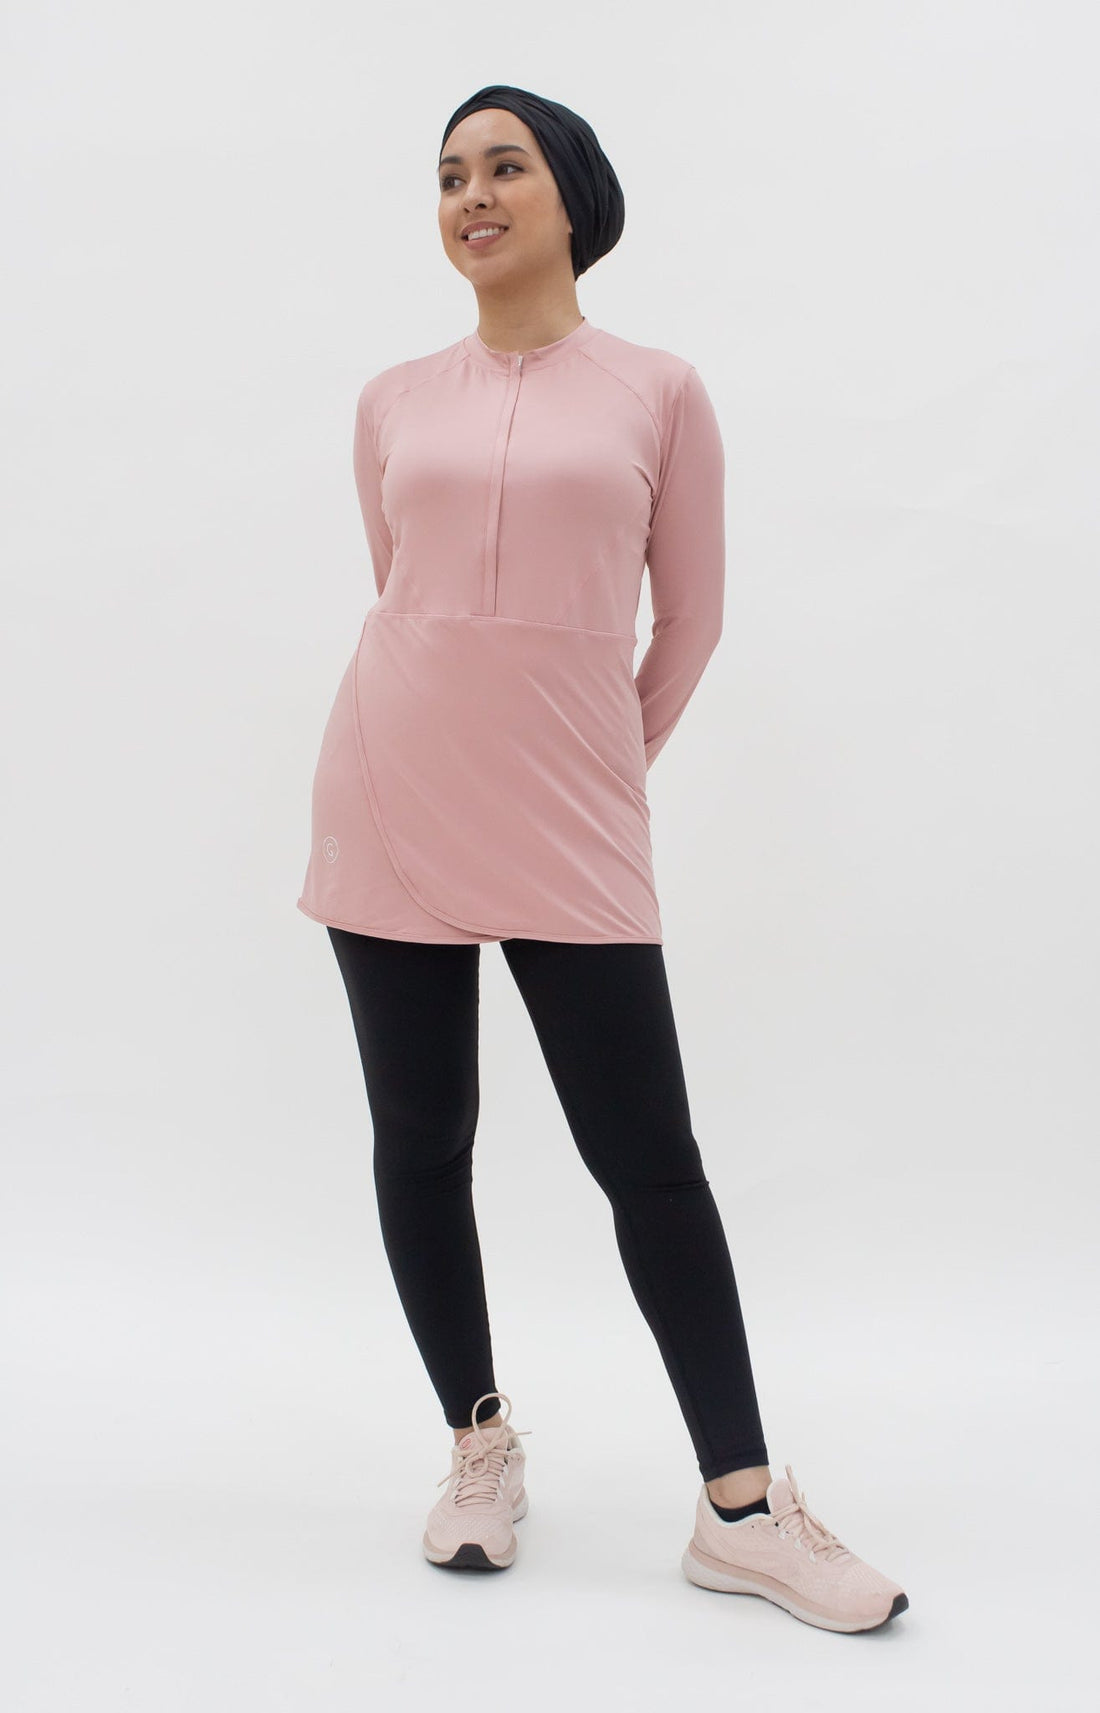 Sports Tops GLOWco Exclusive Criss Cross Top in Blush Pink